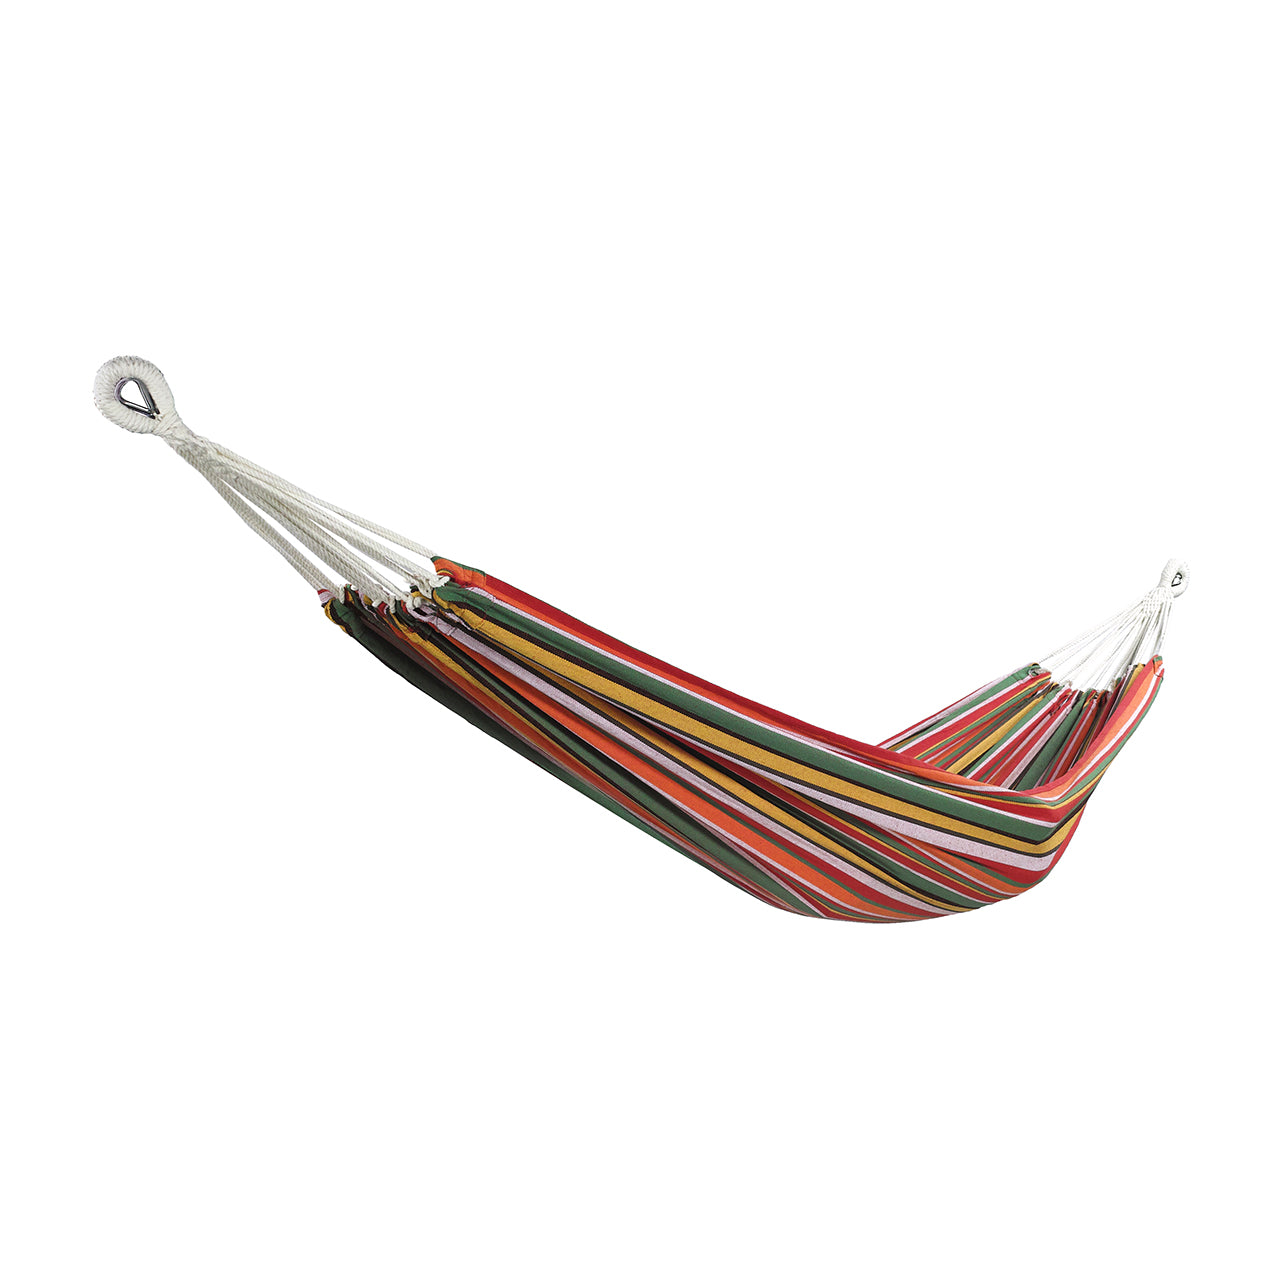 Bliss Hammocks 40-inch Wide Hammock in a Bag with Hand-woven Rope loops in the Cinco de Mayo variation.